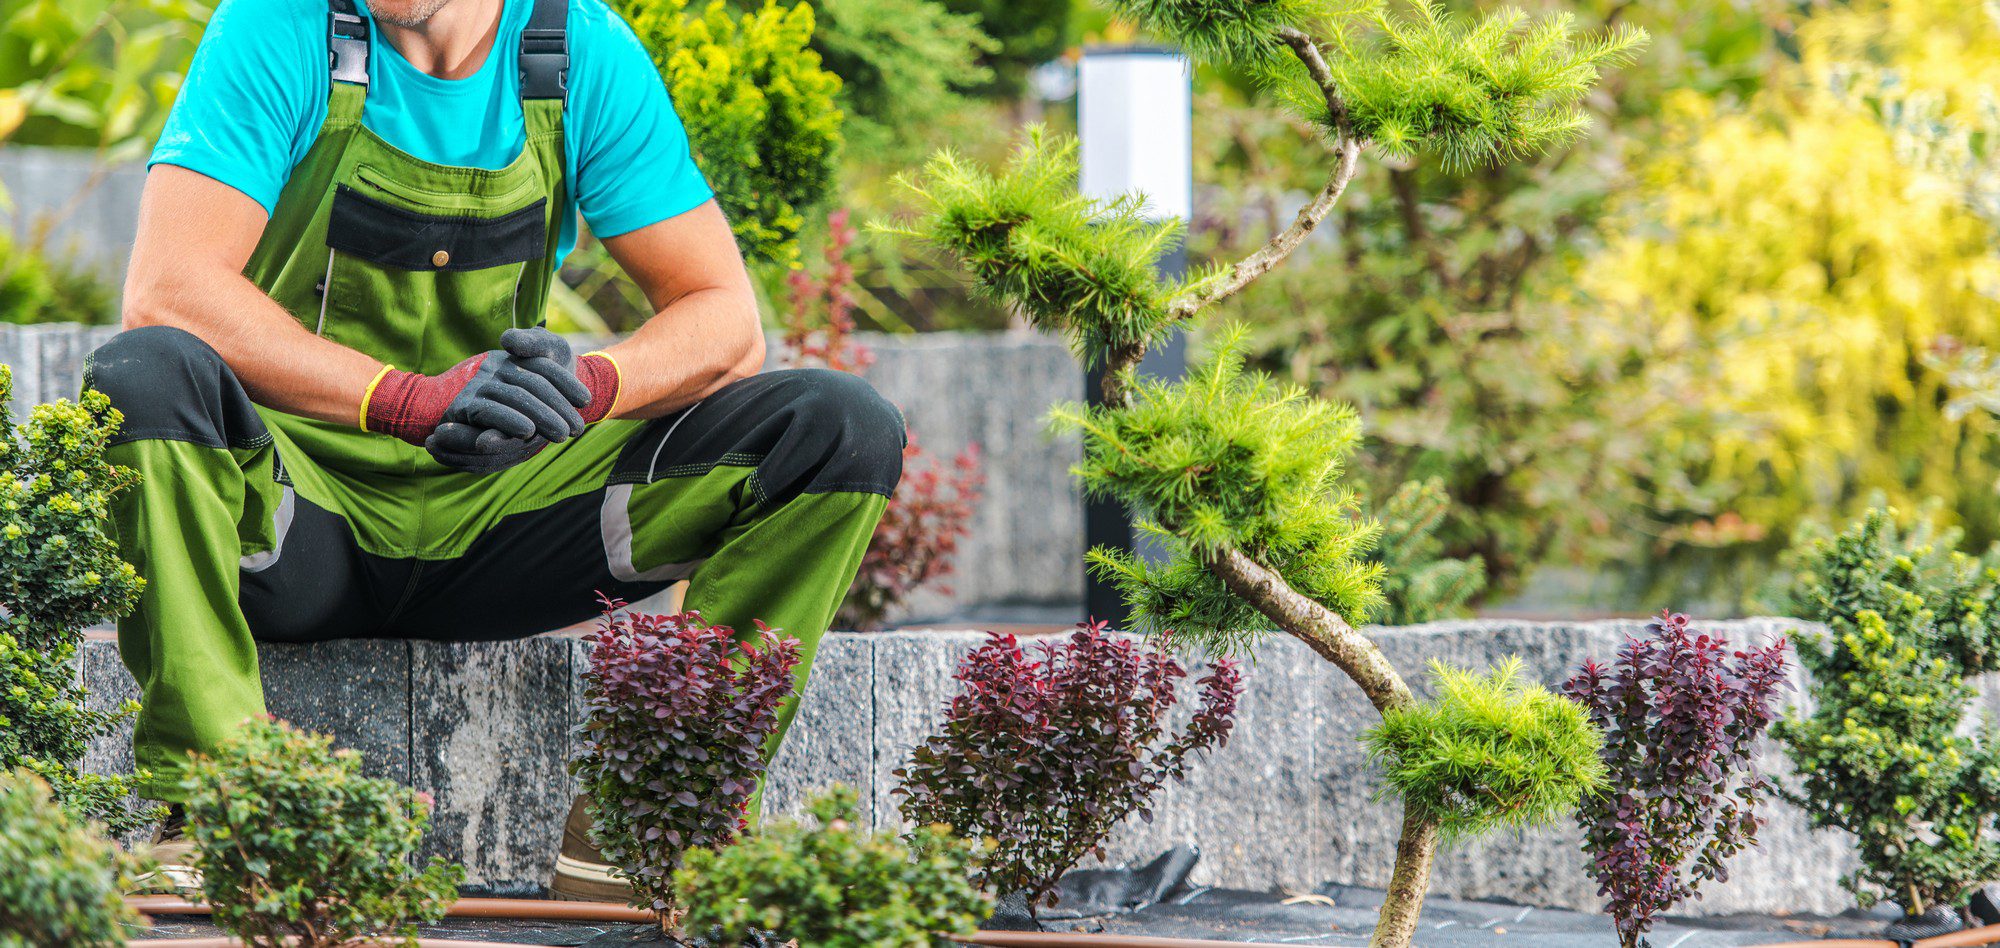 This image shows a person crouching down in a garden or nursery, surrounded by various plants. The individual is wearing a blue shirt, green overalls with a black knee patch, and gloves. In front of them, there's a bonsai tree on the left side, which is a small, carefully pruned tree that resembles larger tree forms. To the right of the bonsai, there are some small shrubs with purplish leaves. The background is filled with greenery, which suggests that this is an outdoor setting, likely a nursery or a landscaped area. The person seems to be involved in some sort of gardening work or plant maintenance. The bright daylight indicates it's daytime, and the lively colours of the plants suggest the season is spring or summer.